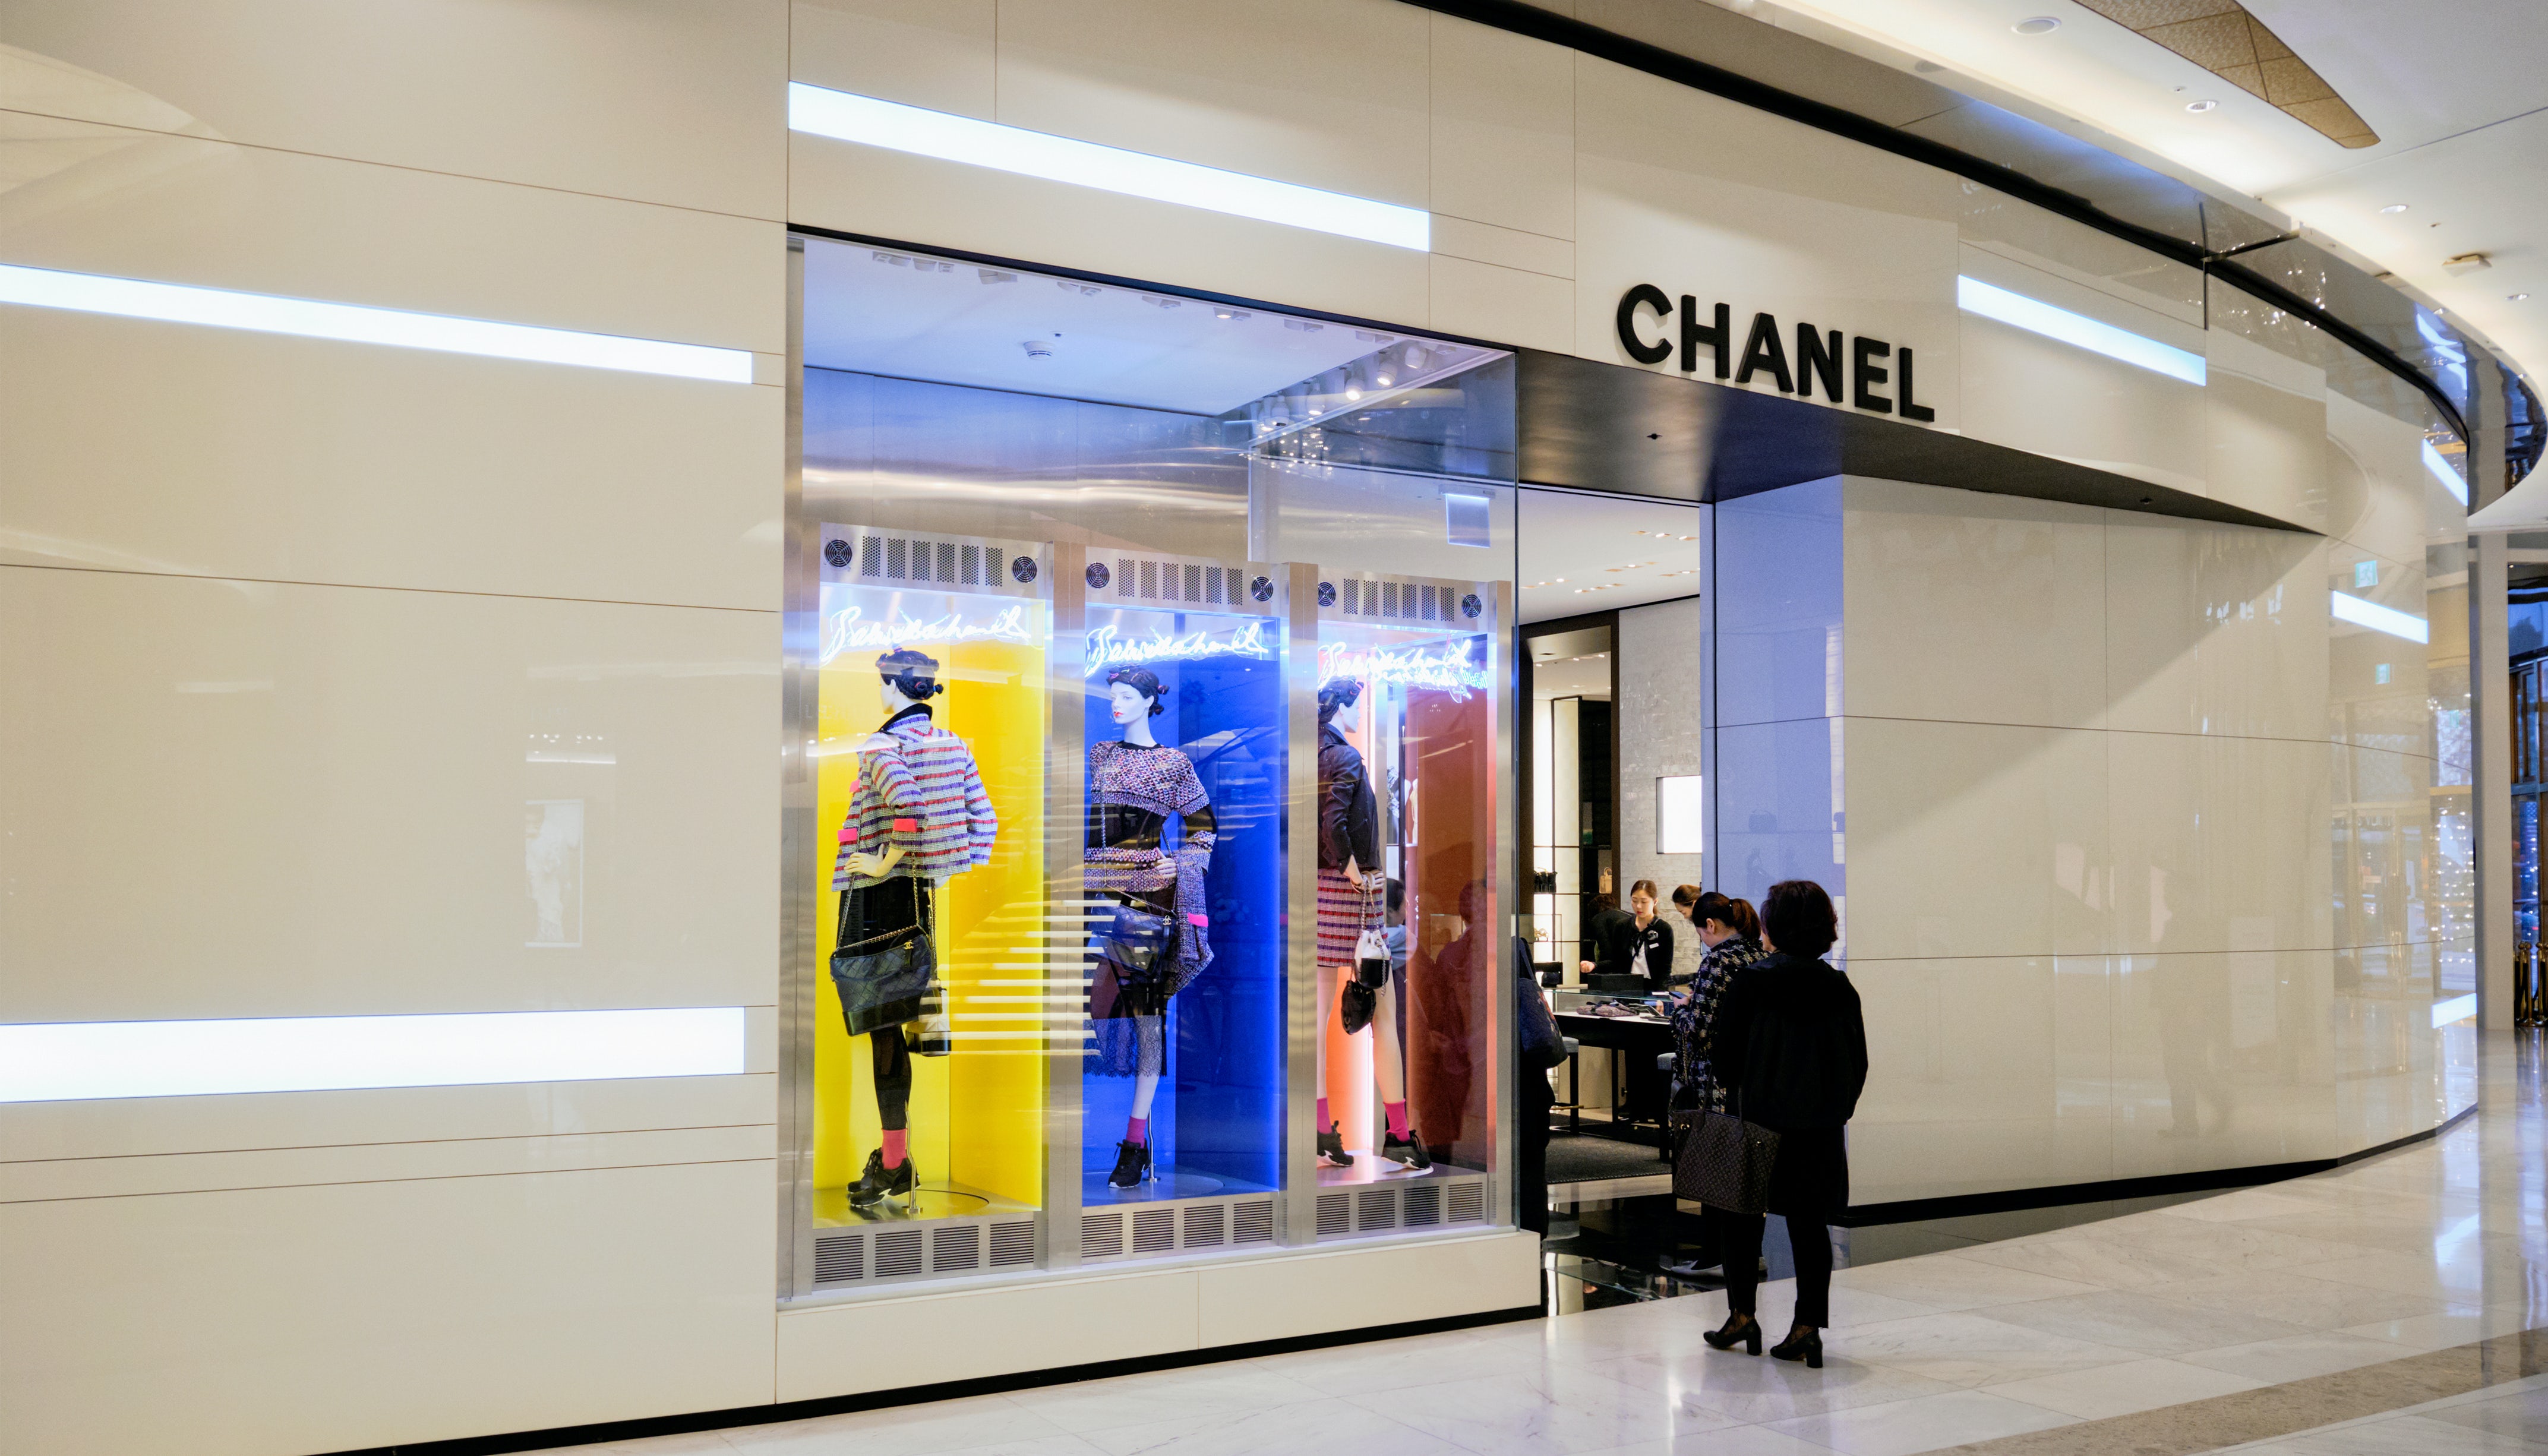 South Korean Shoppers Go the Distance to Beat Chanel Price Hike